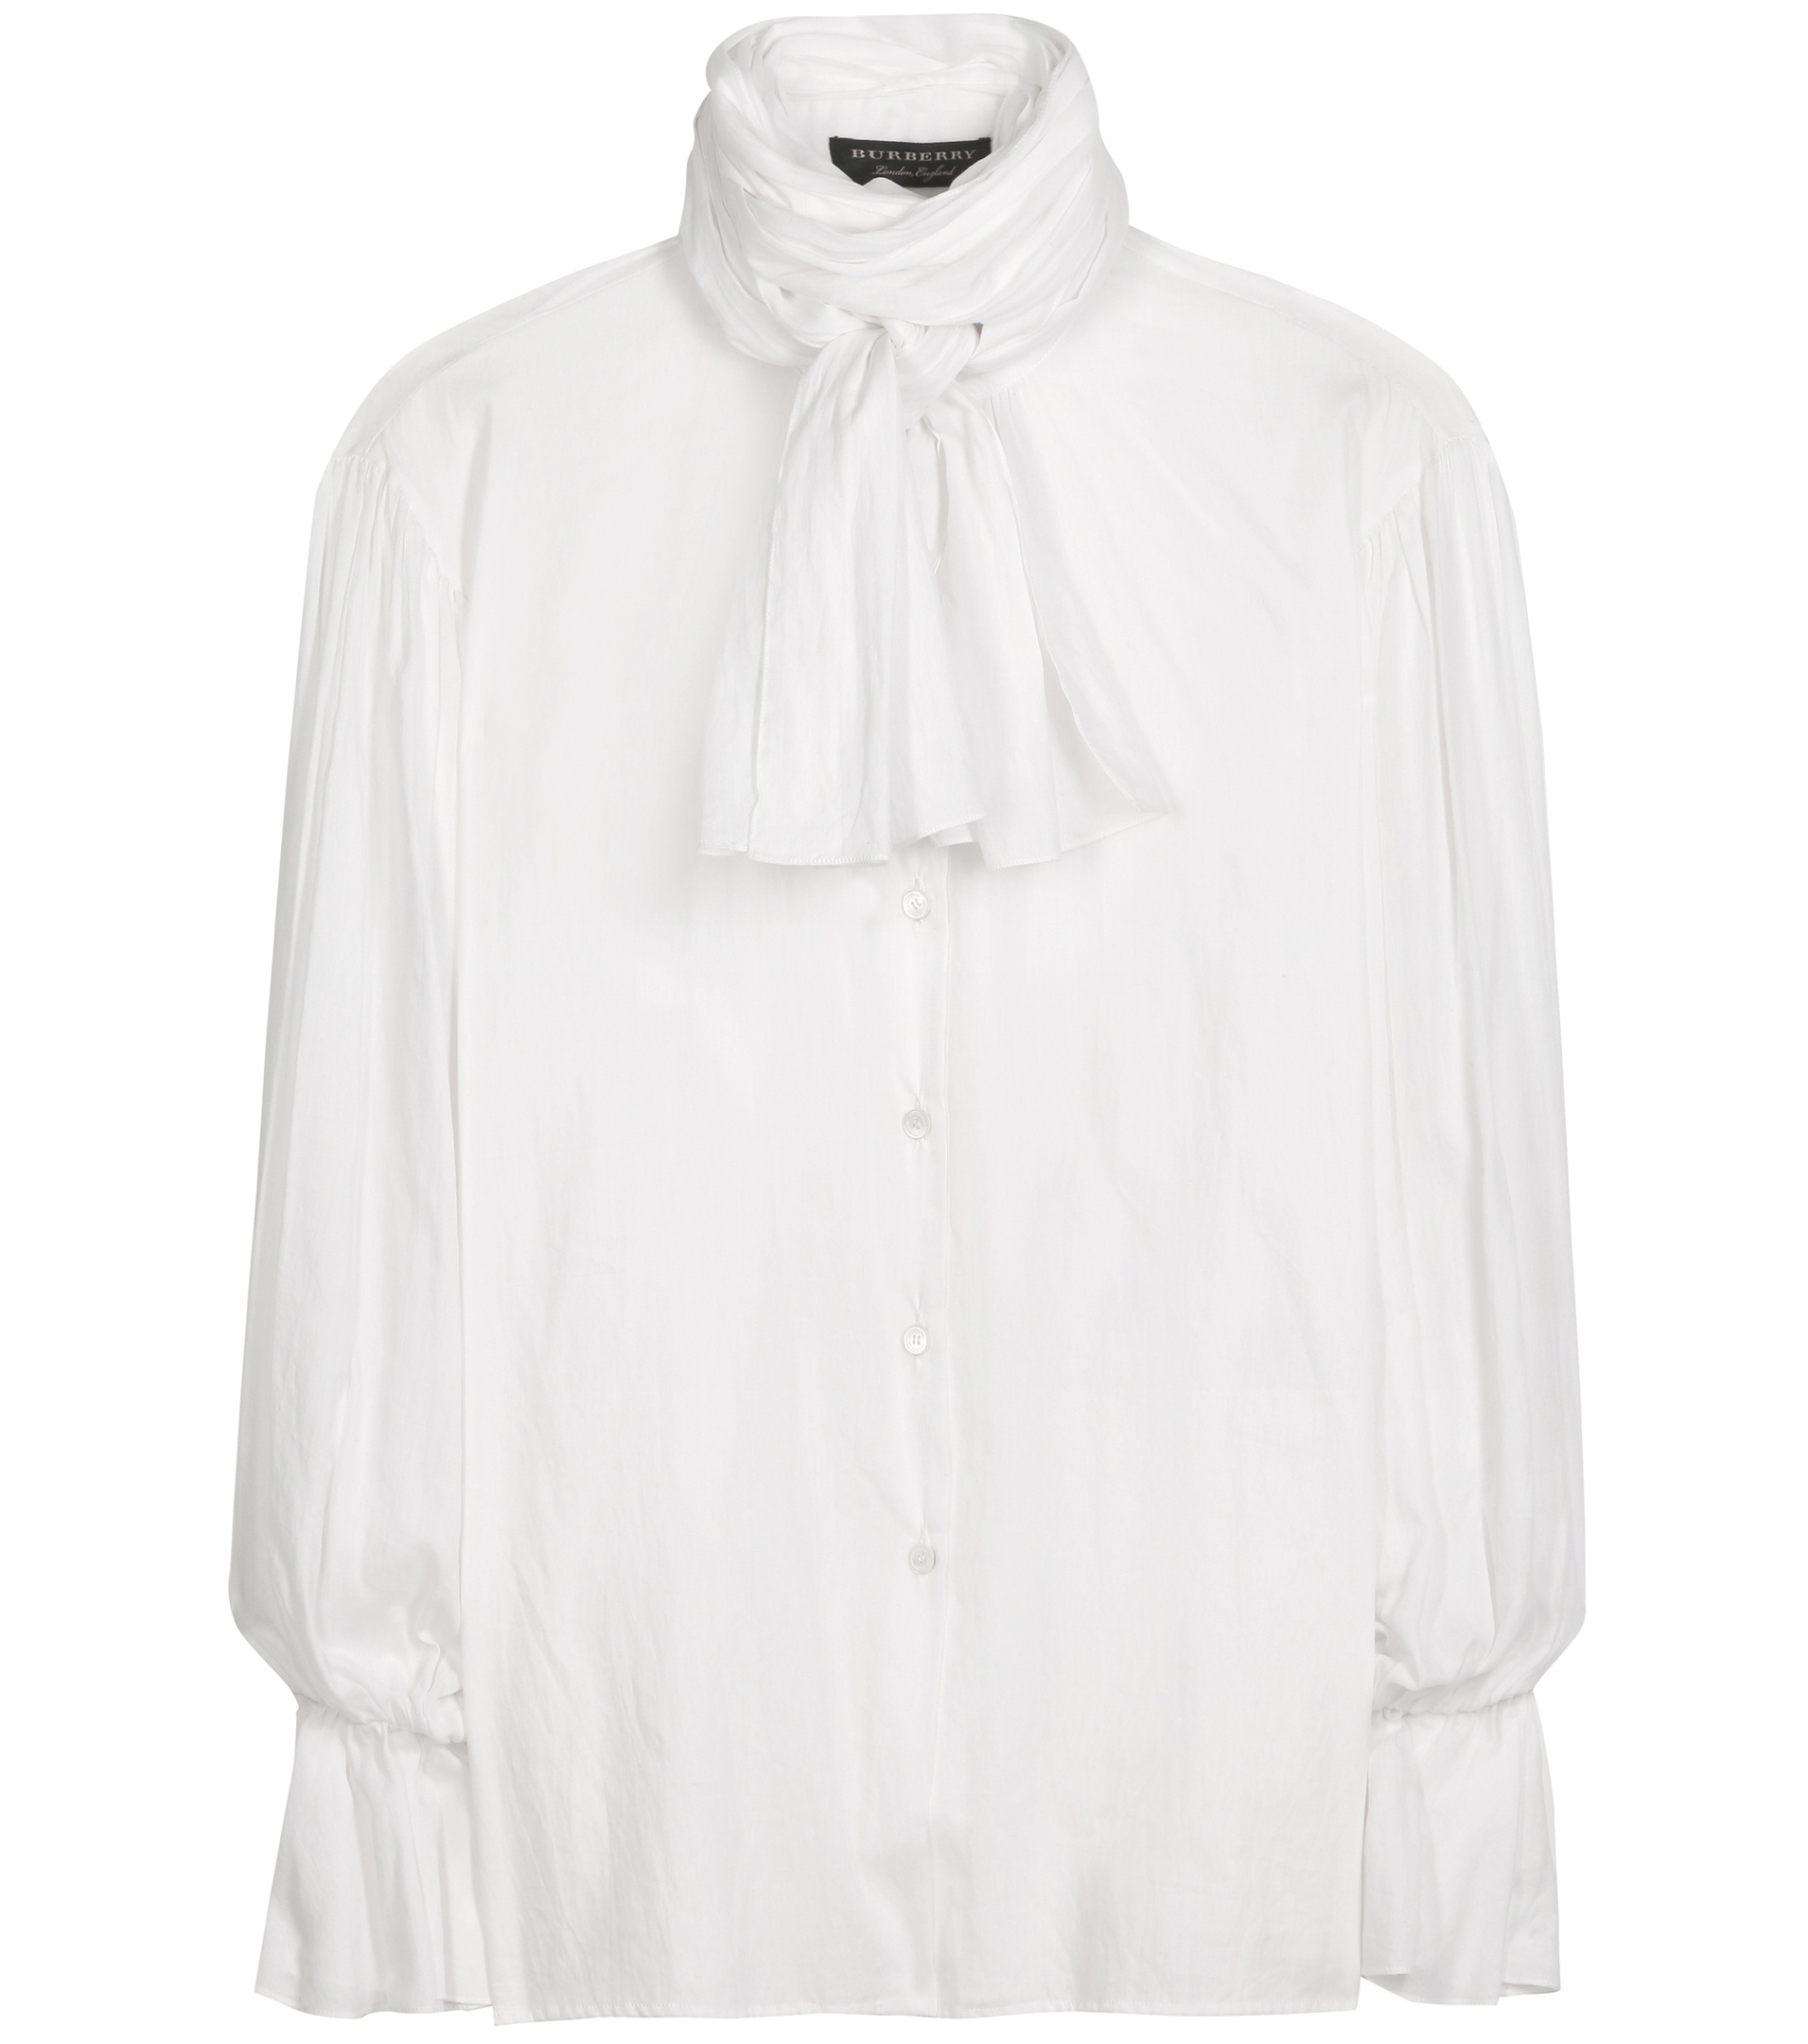 Burberry Cotton Blouse in White - Lyst